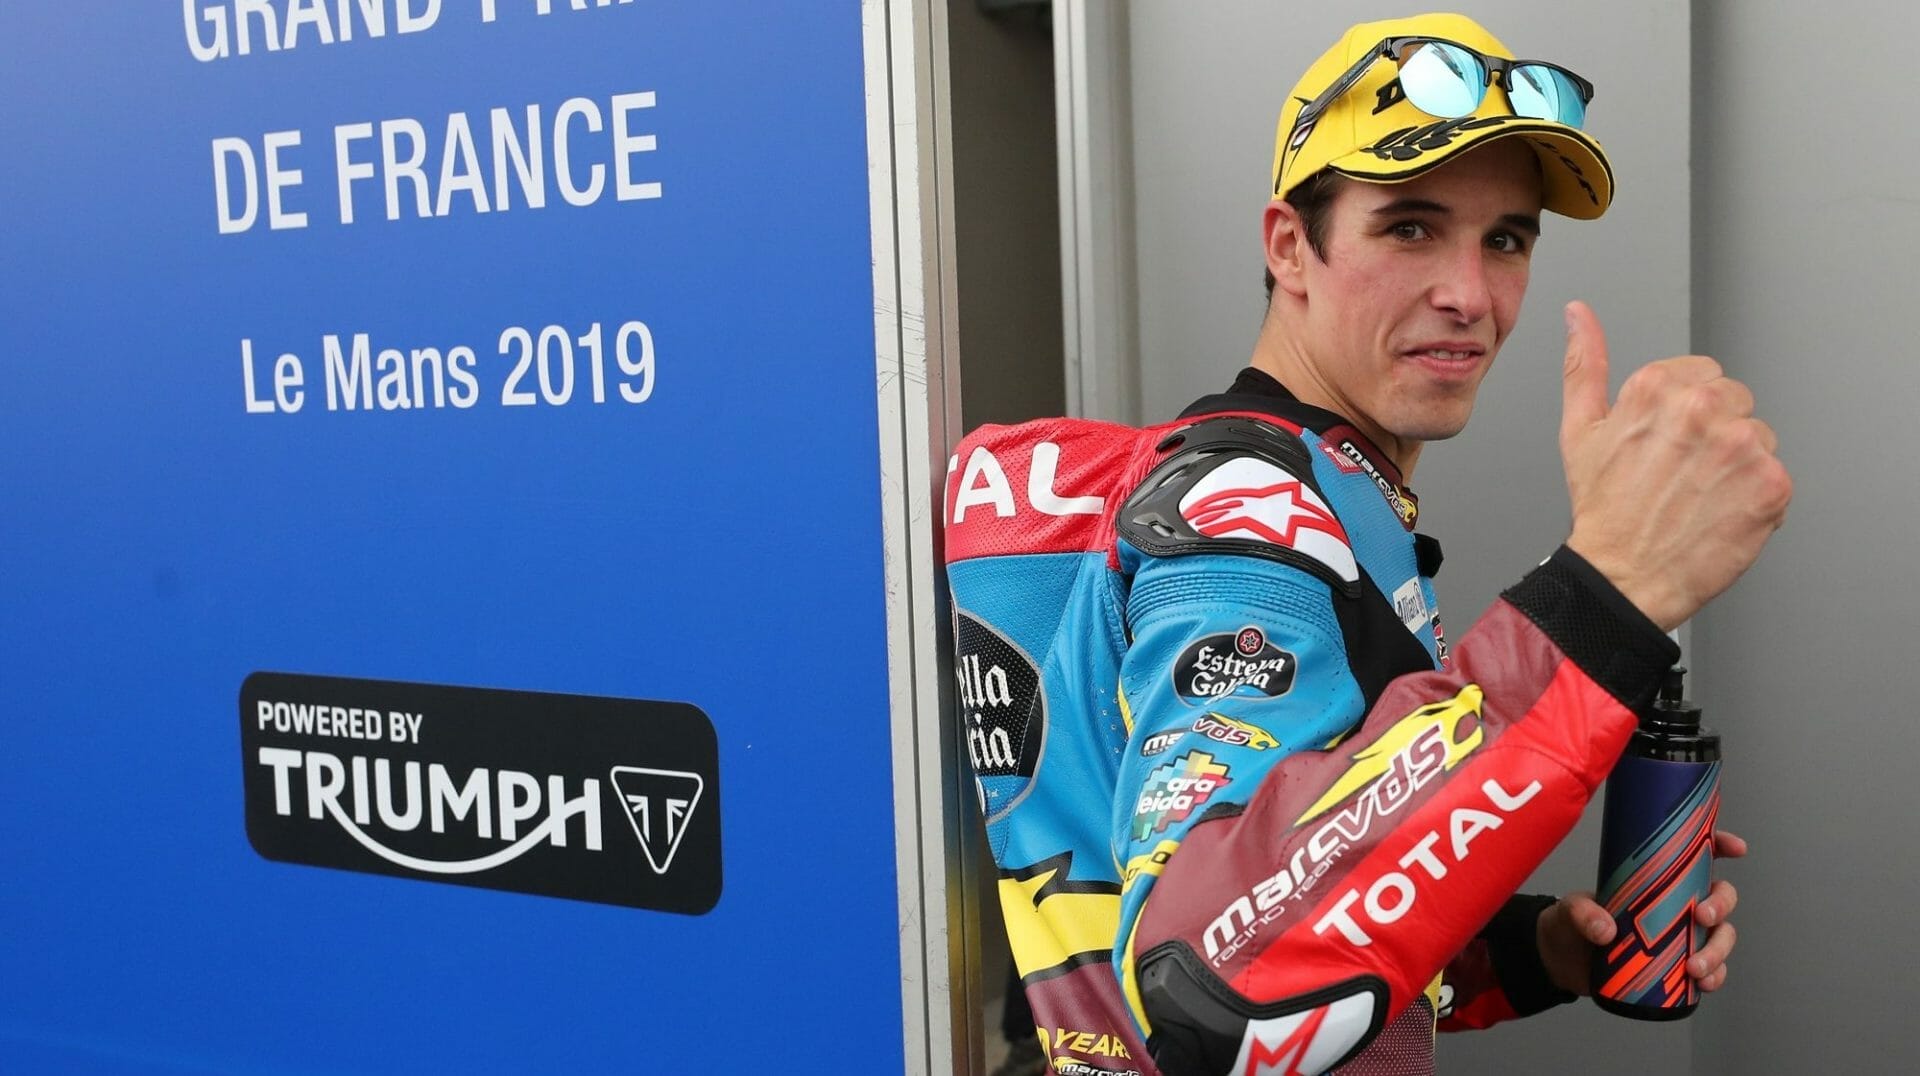 Alex Marquez stays in Moto2 and drives for Petronas